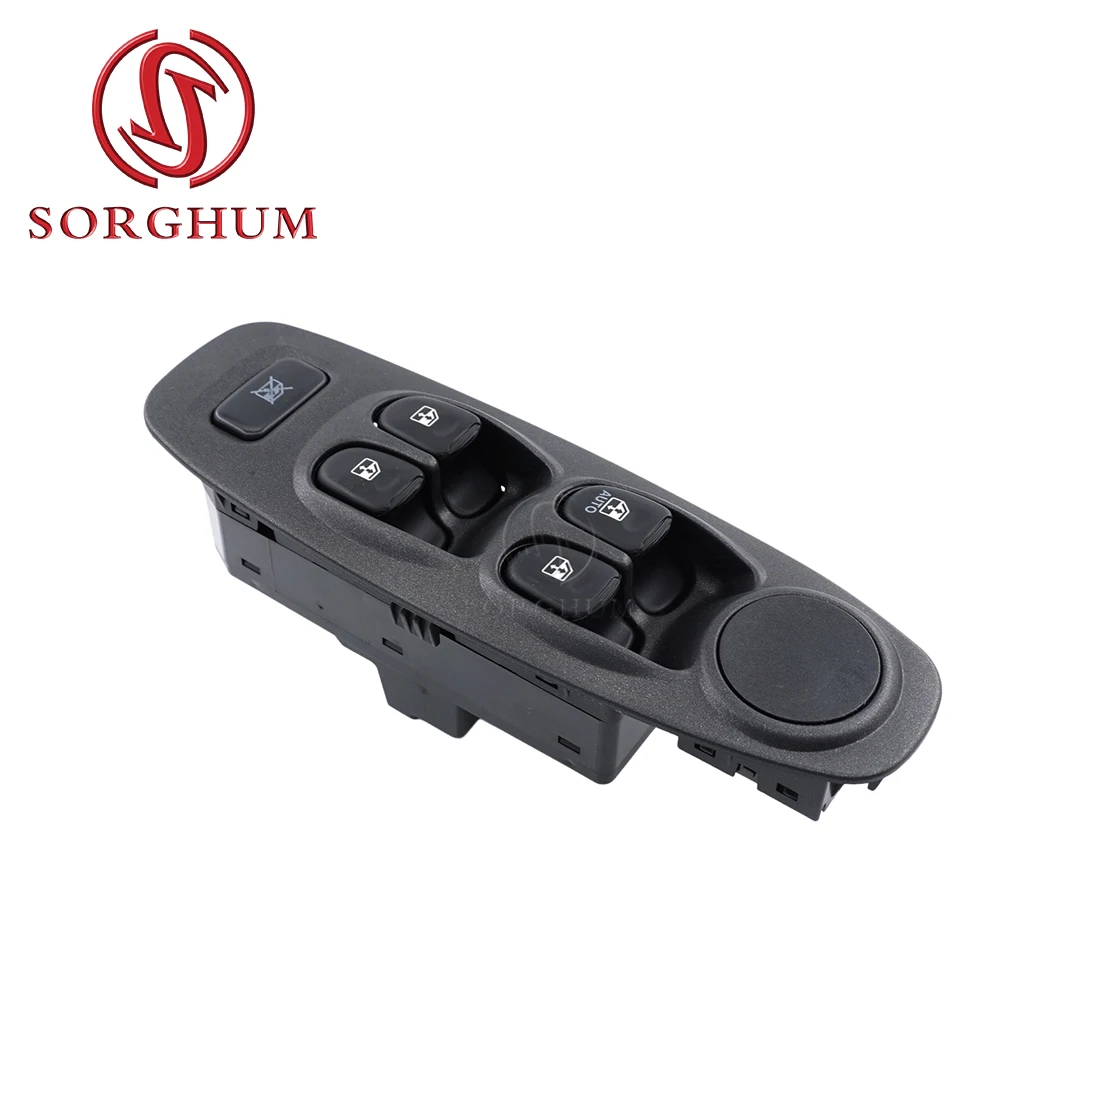 

Sorghum 93570-25005 For Hyundai Accent Elantra 2002-2005 Regulator Window Lifter Control Switch Glass Master Button 9357025005